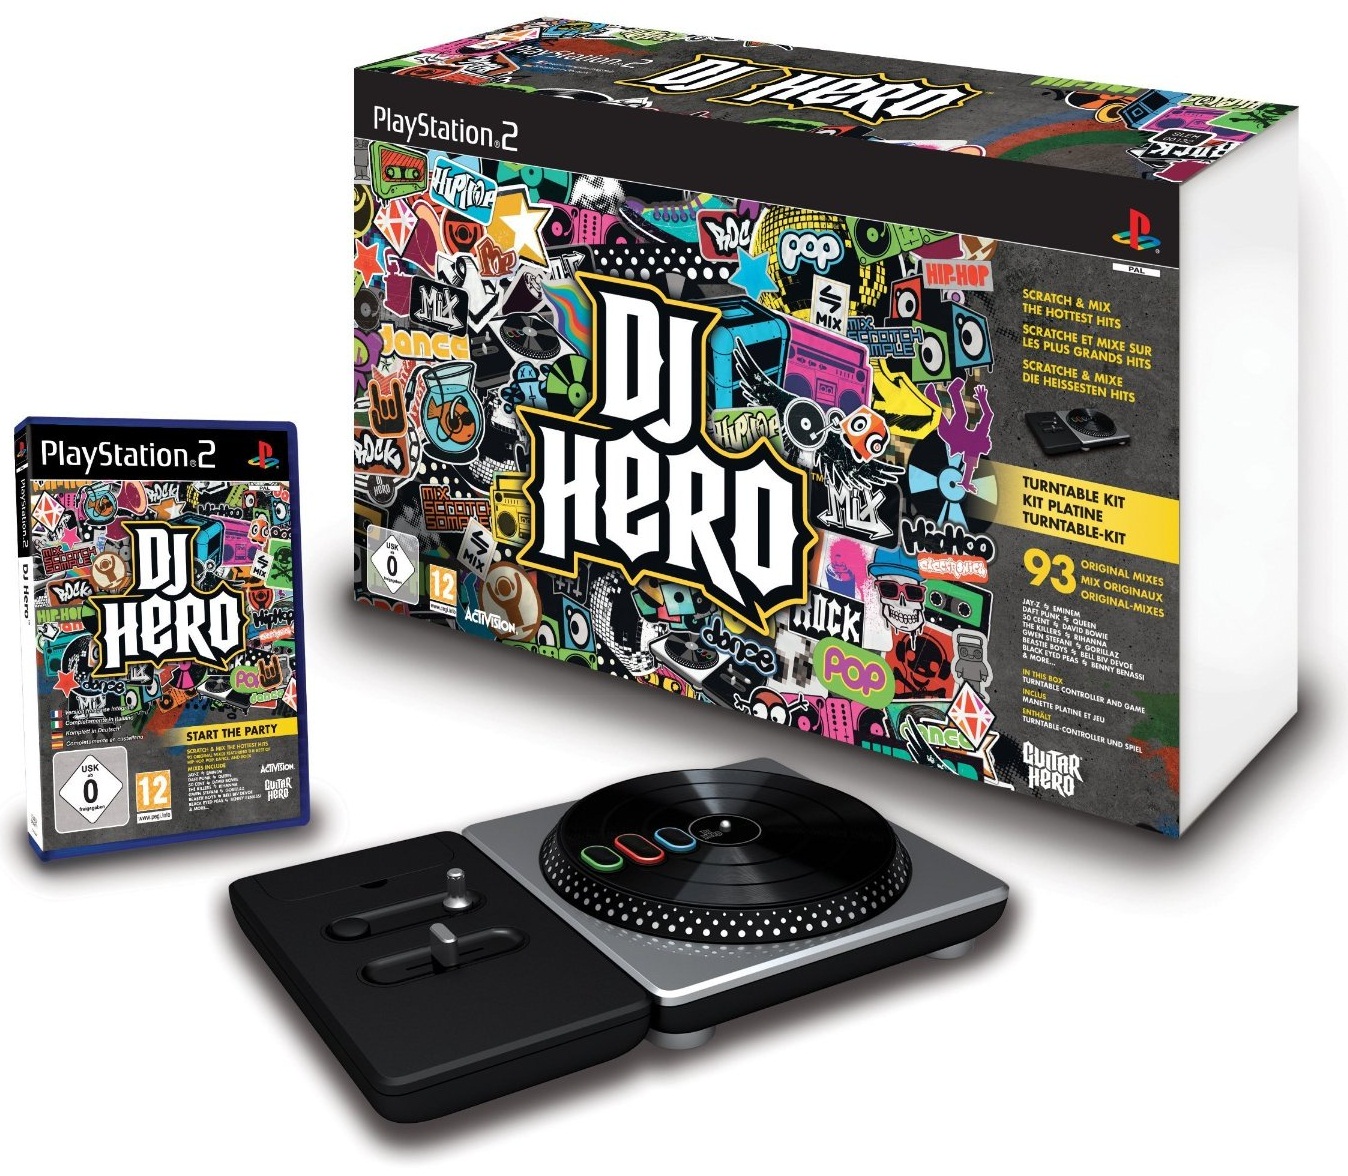 Playstation 2 DJ Hero PS2 Game Only No Turntable 90 Plus Songs